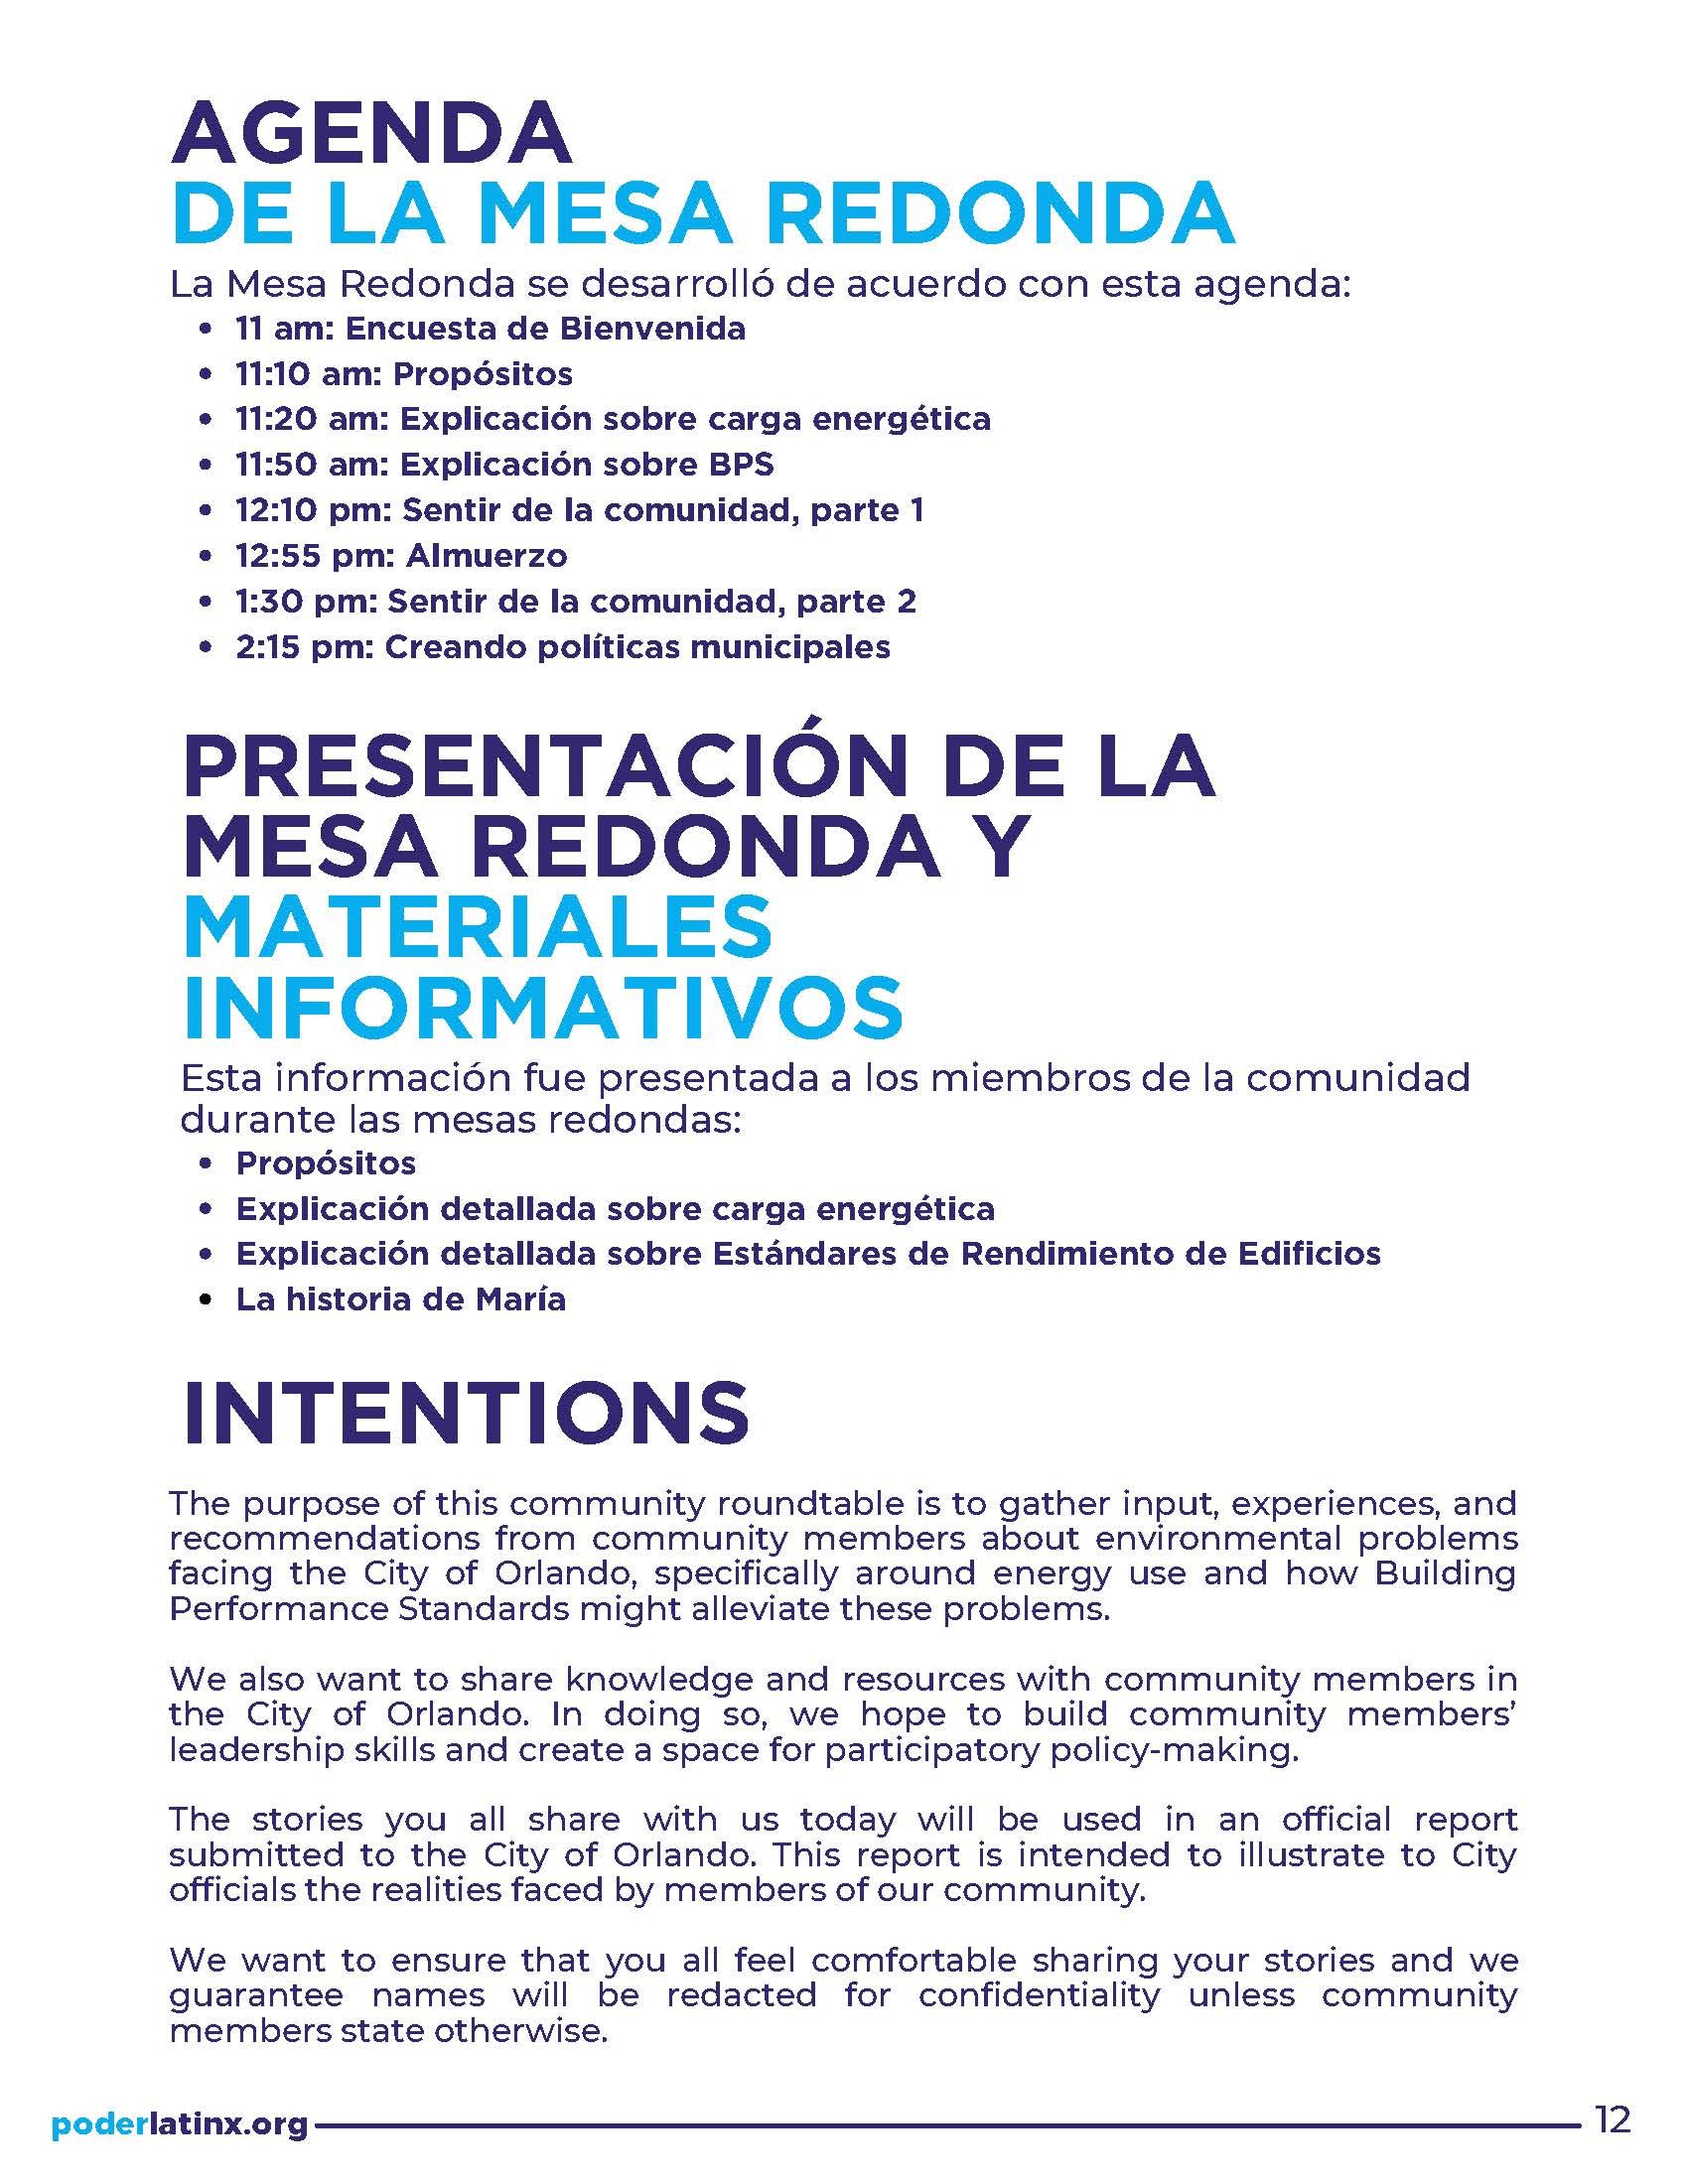 IMT Report - Spanish_Page_12.jpg